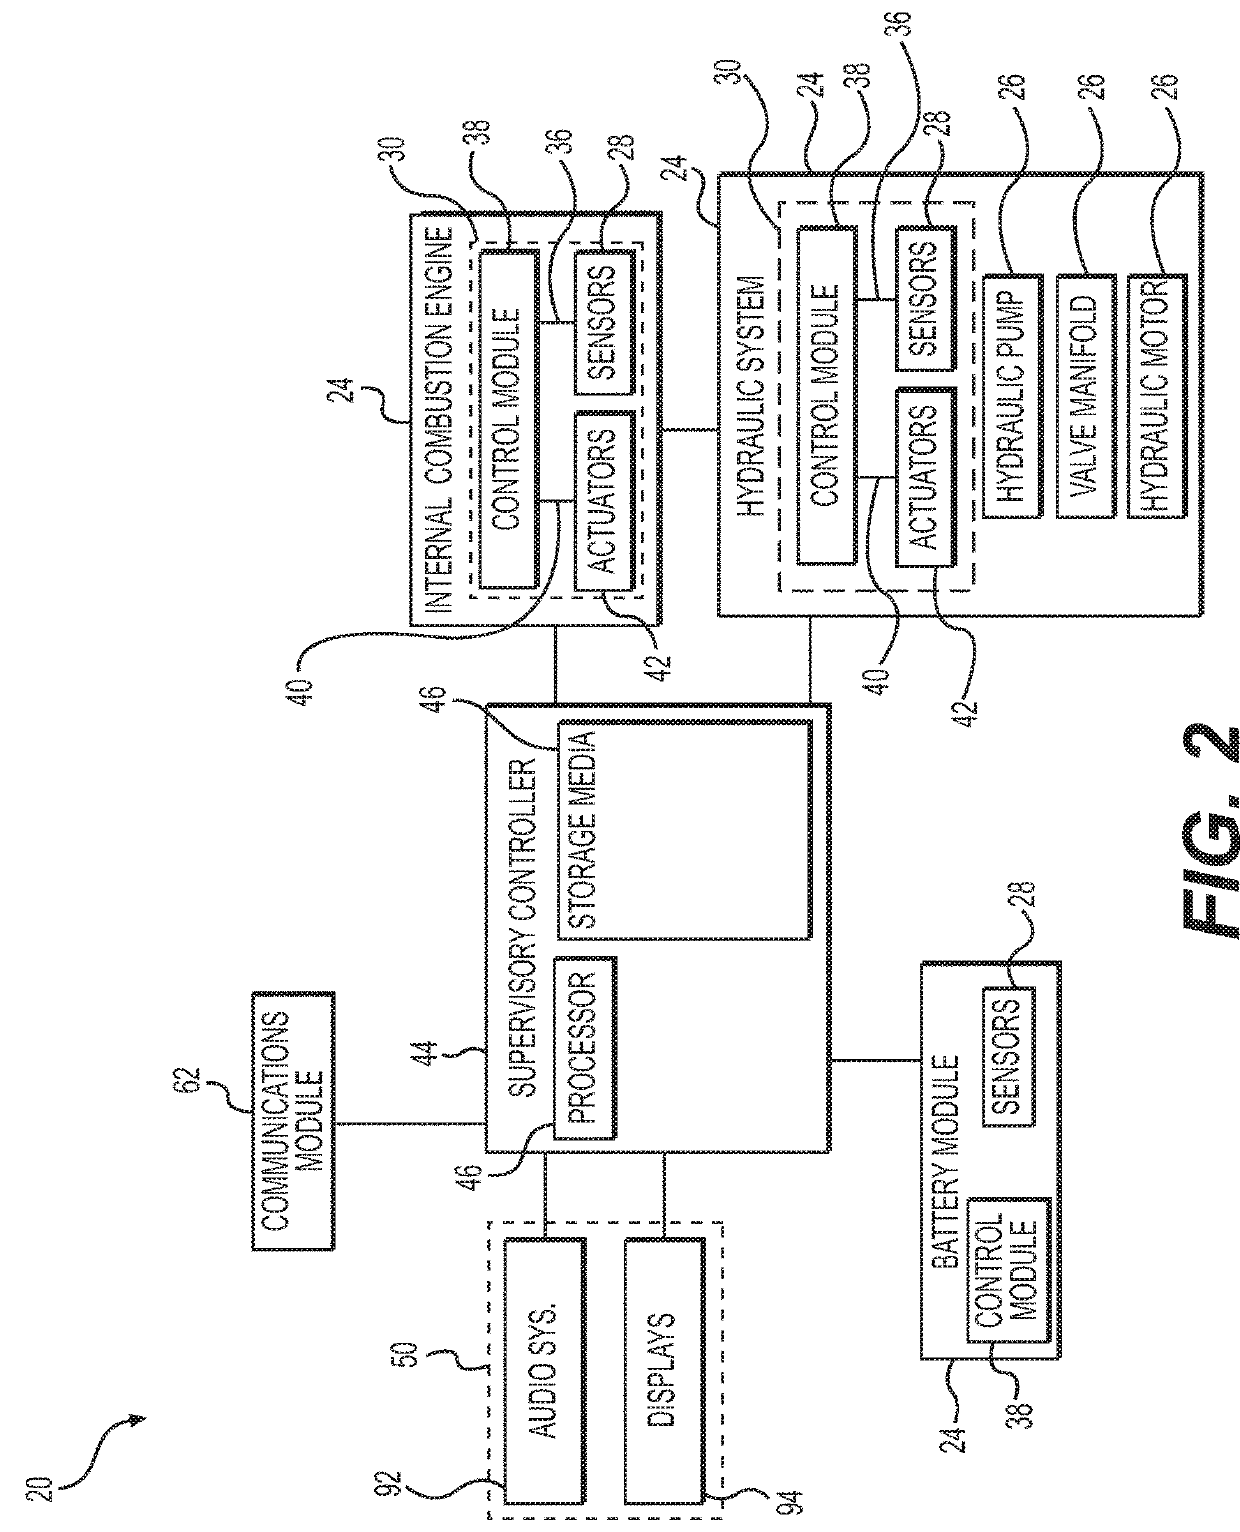 Distributed system and method for monitoring vehicle operation